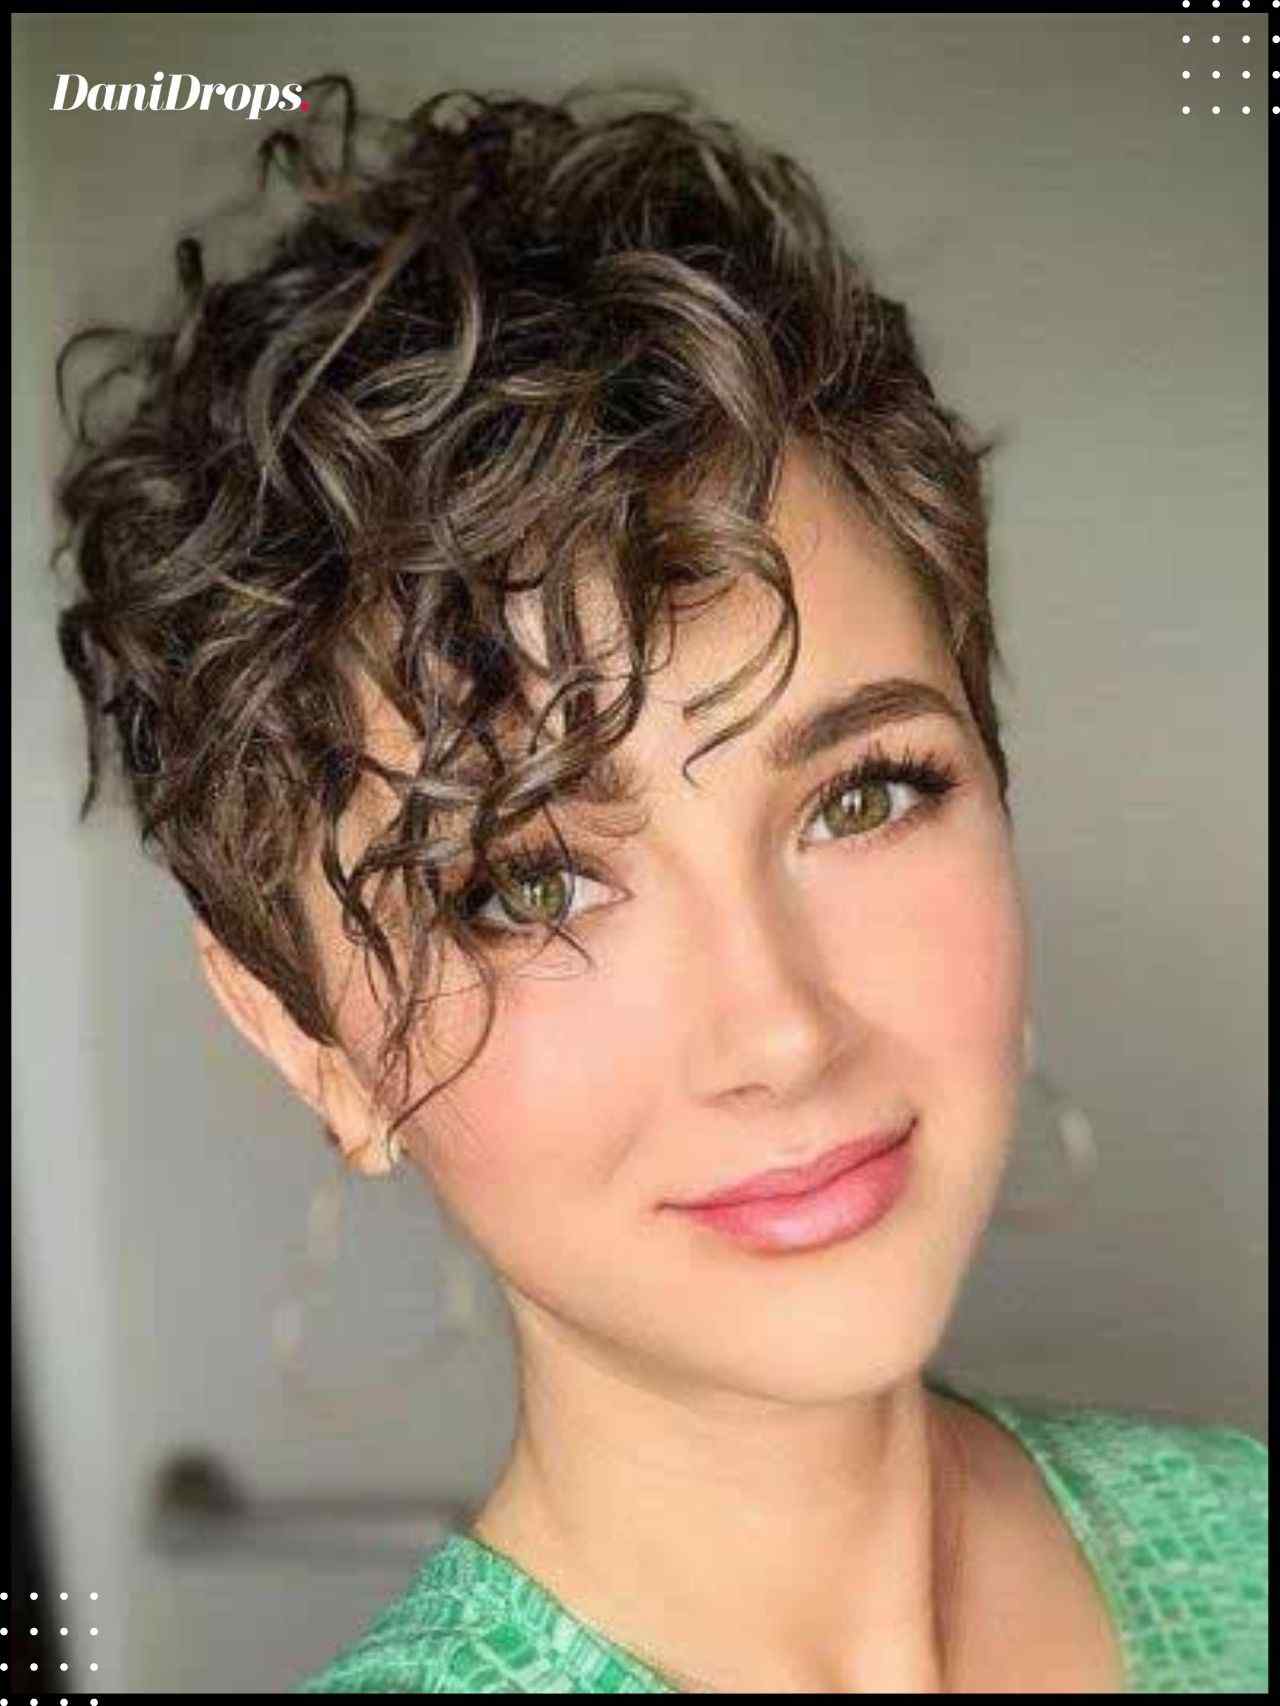 47+ Bold Curly Pixie Cut Ideas To Transform Your Style - The Cuddl | Curly  hair styles, Short curly haircuts, Short hair styles